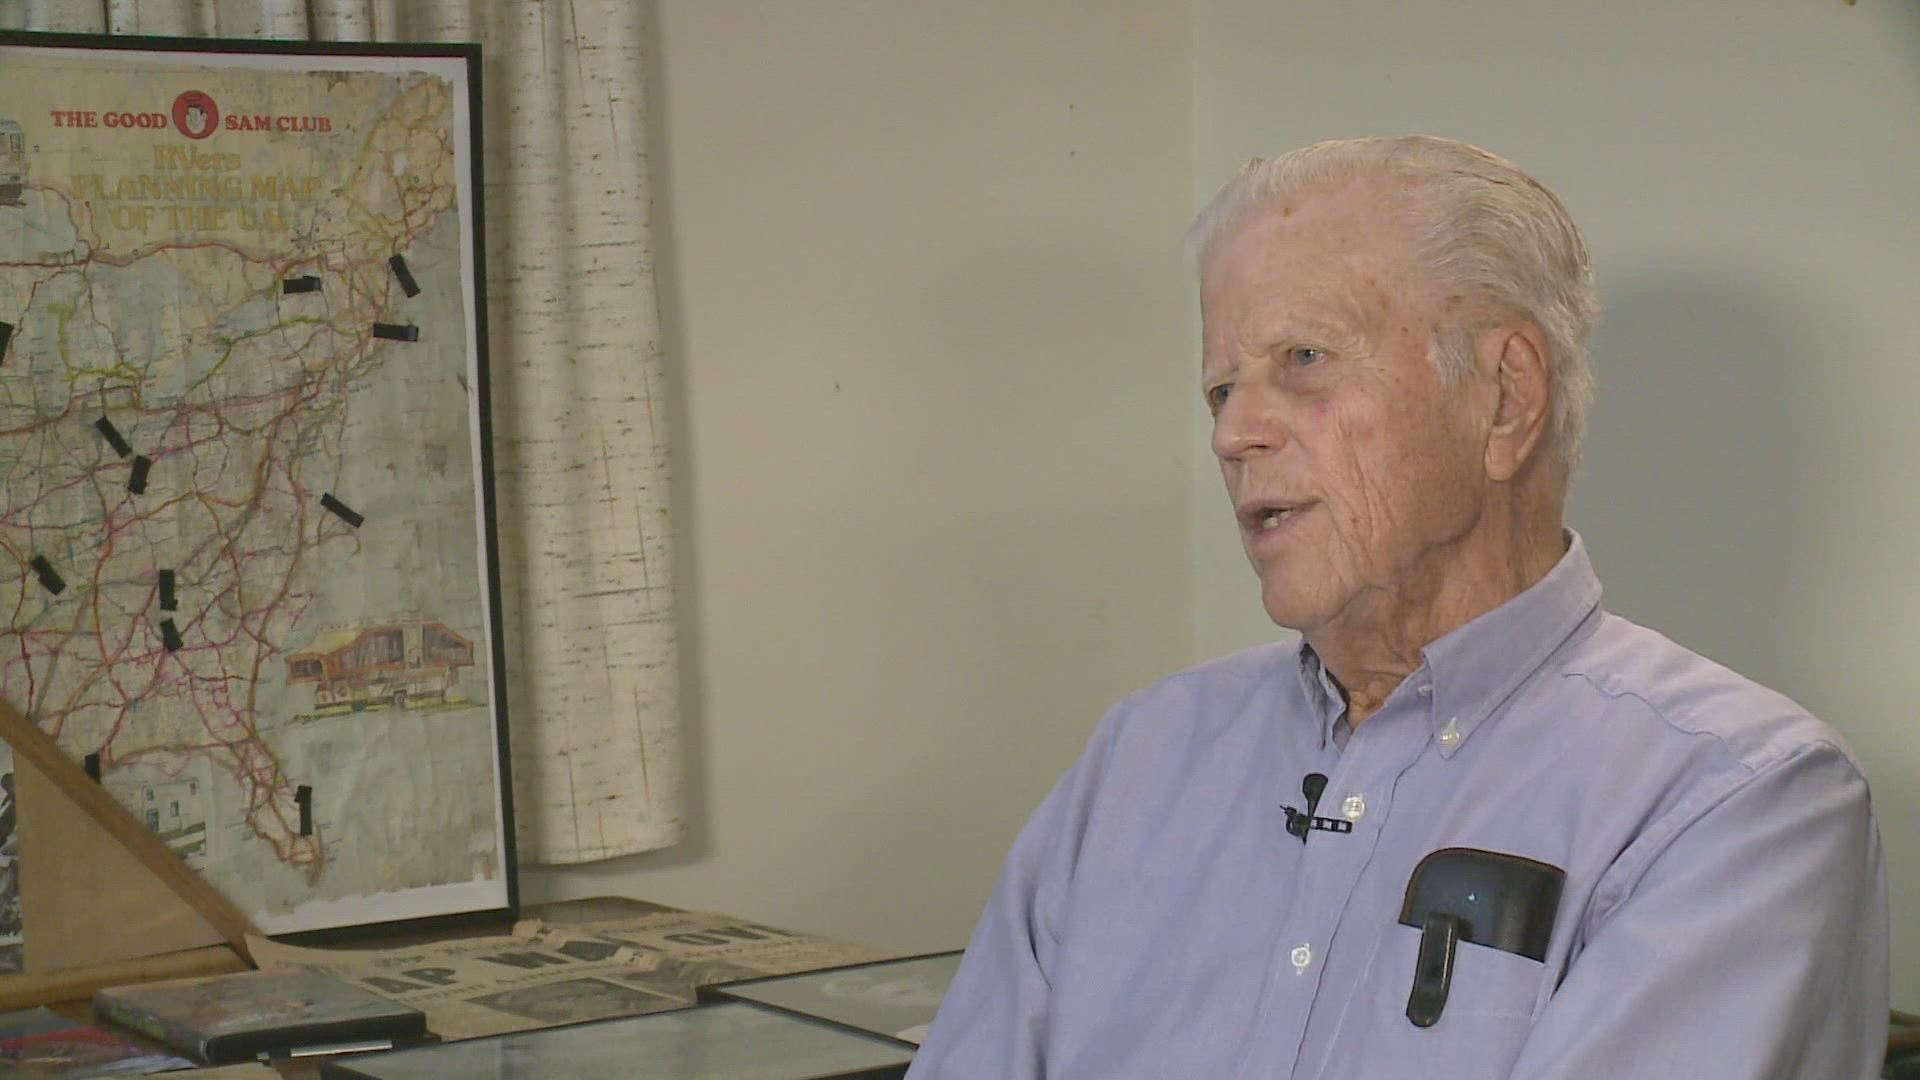 95-year-old Howard Cederlund left high school to serve in the Pacific theater when he was just 17 years old.